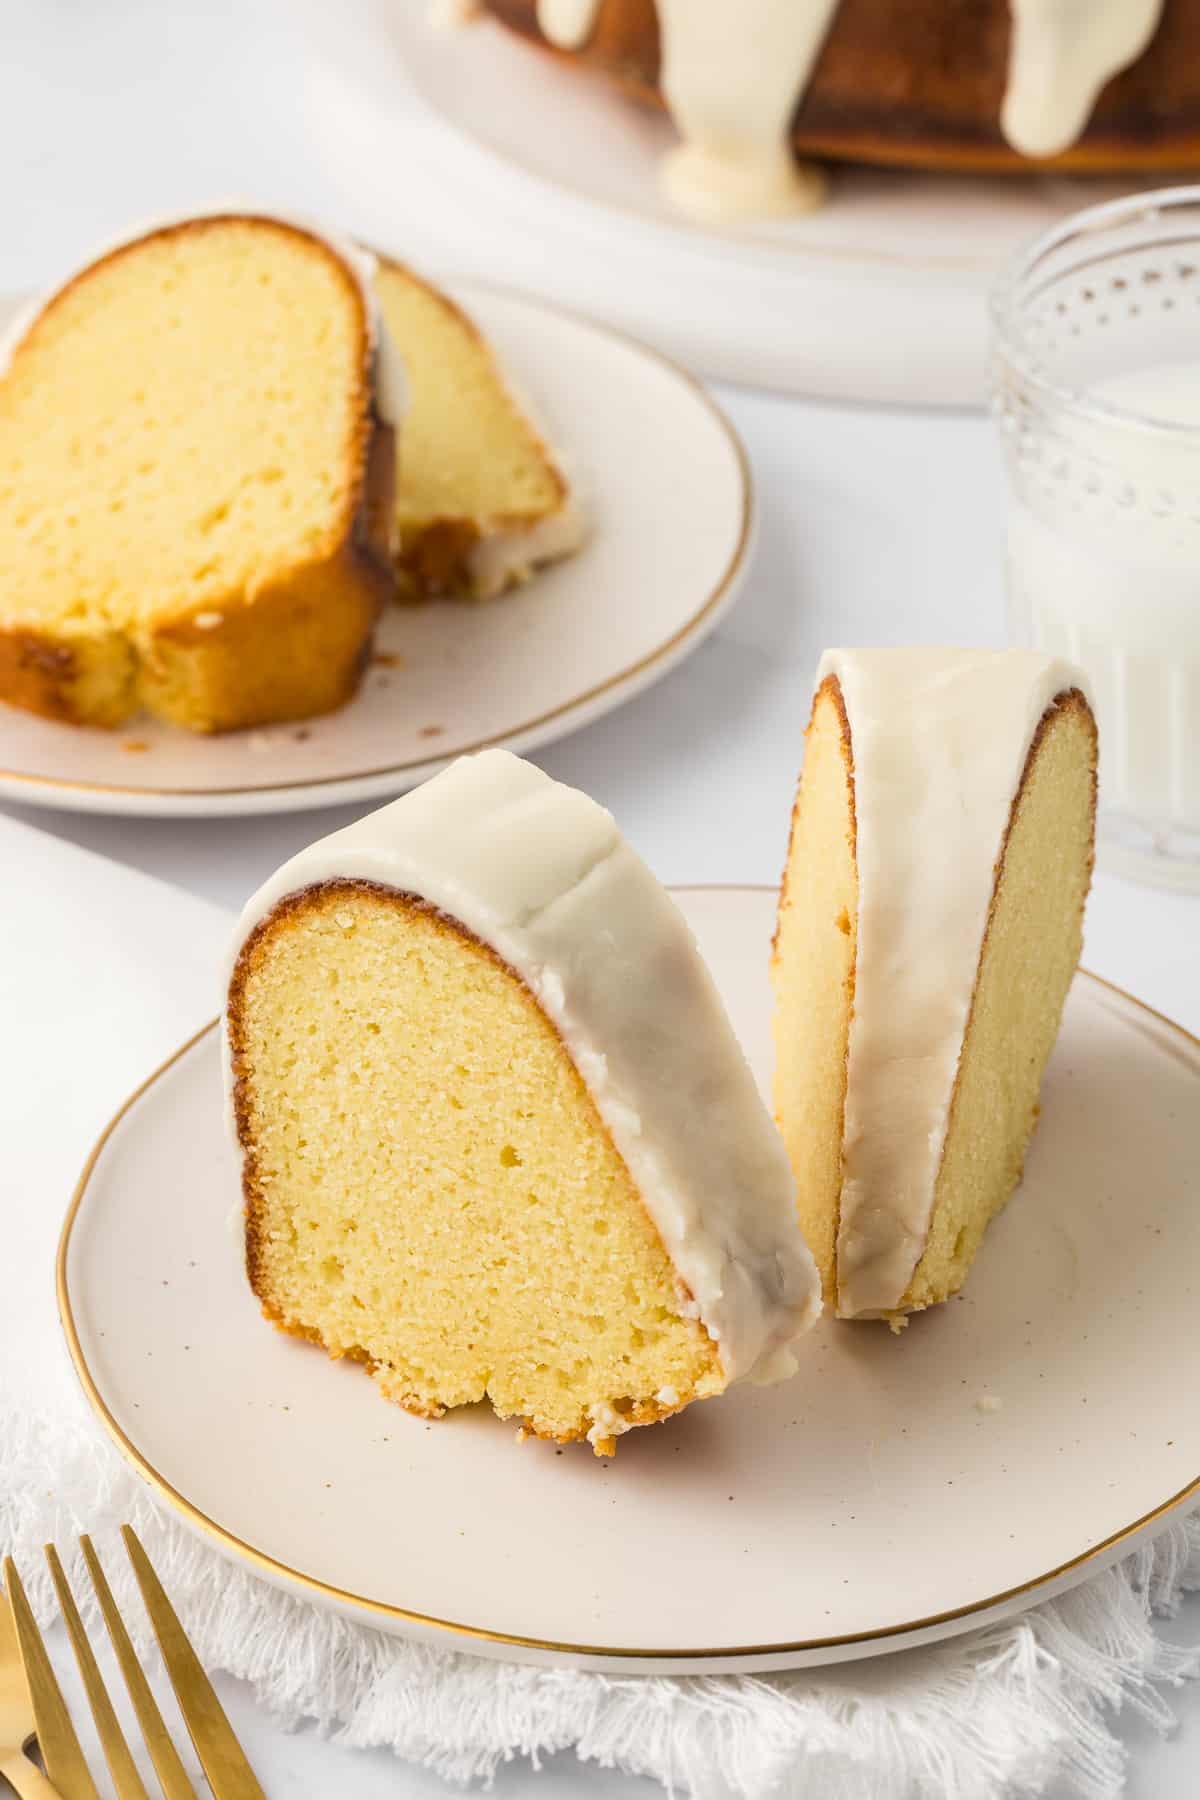 two slices of vanilla bundt cake on a small white plate with a fork beside it, another plate with slices behind it, and a small glass of milk